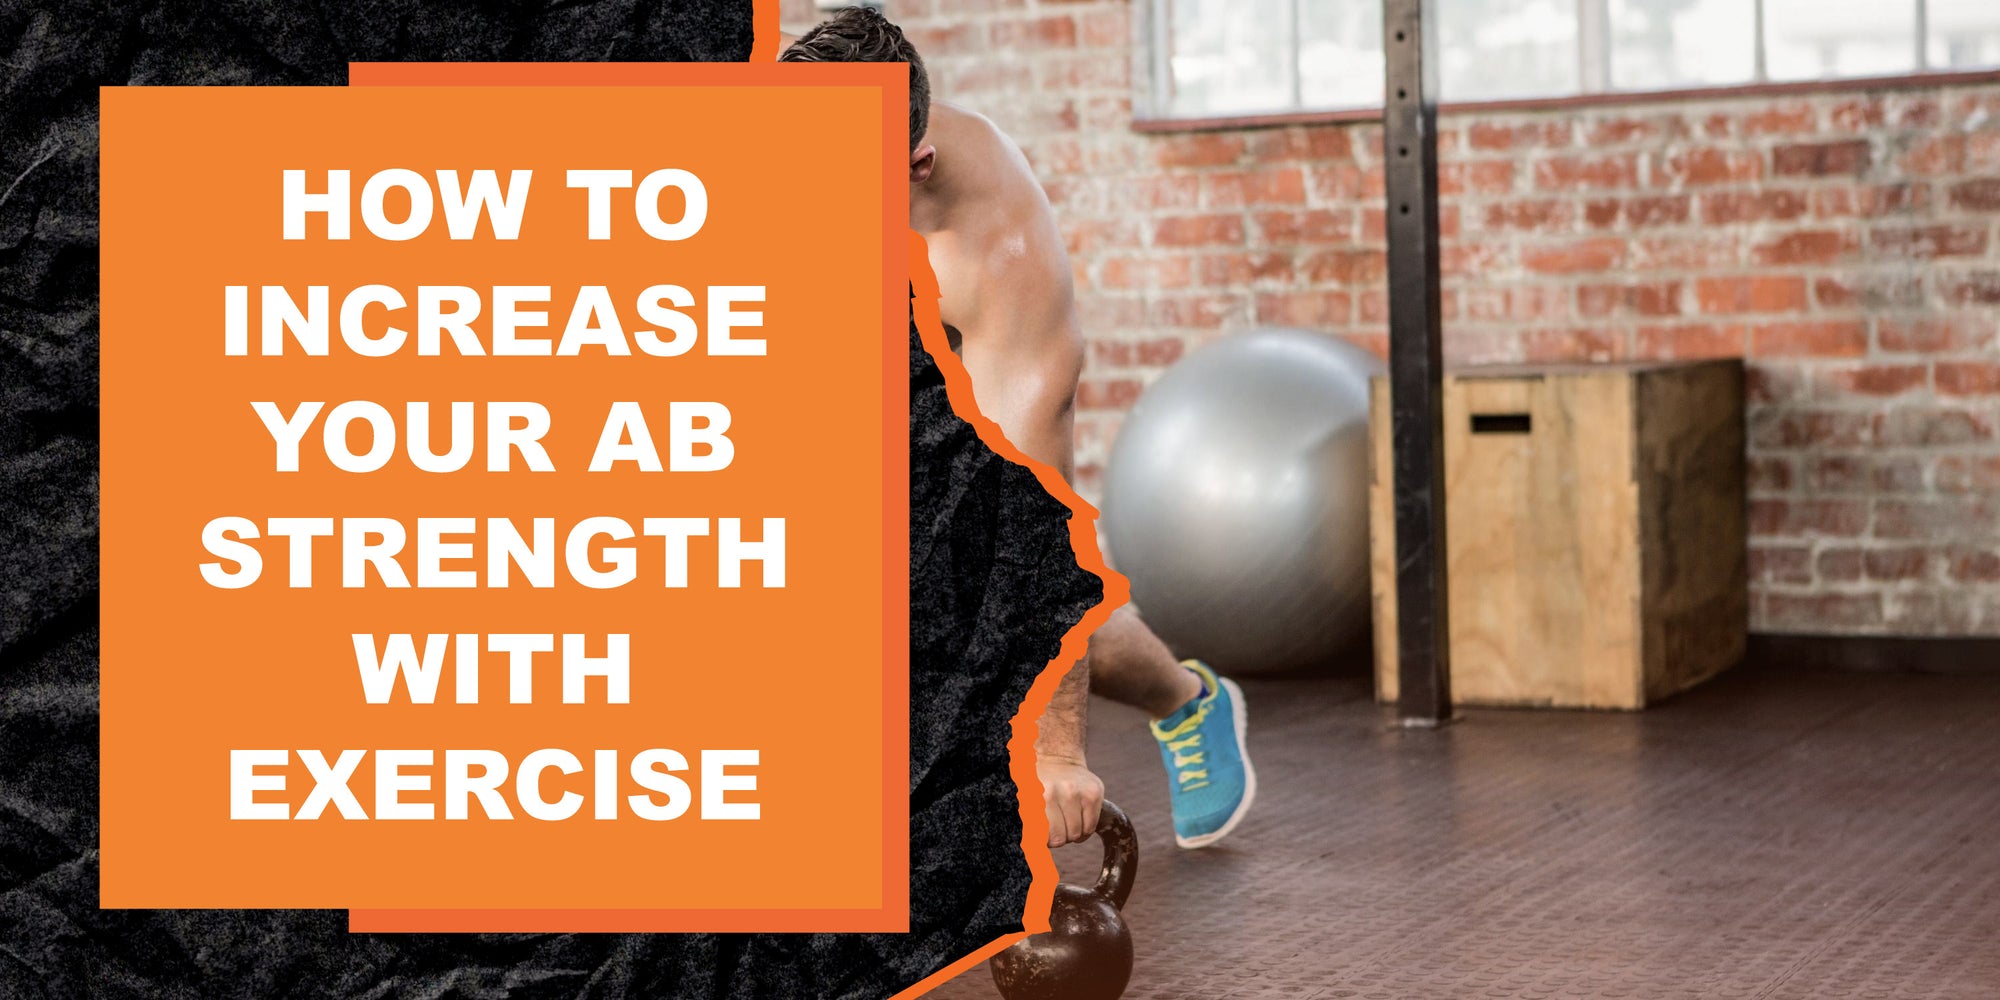 How to Increase Your Ab Strength with Exercise